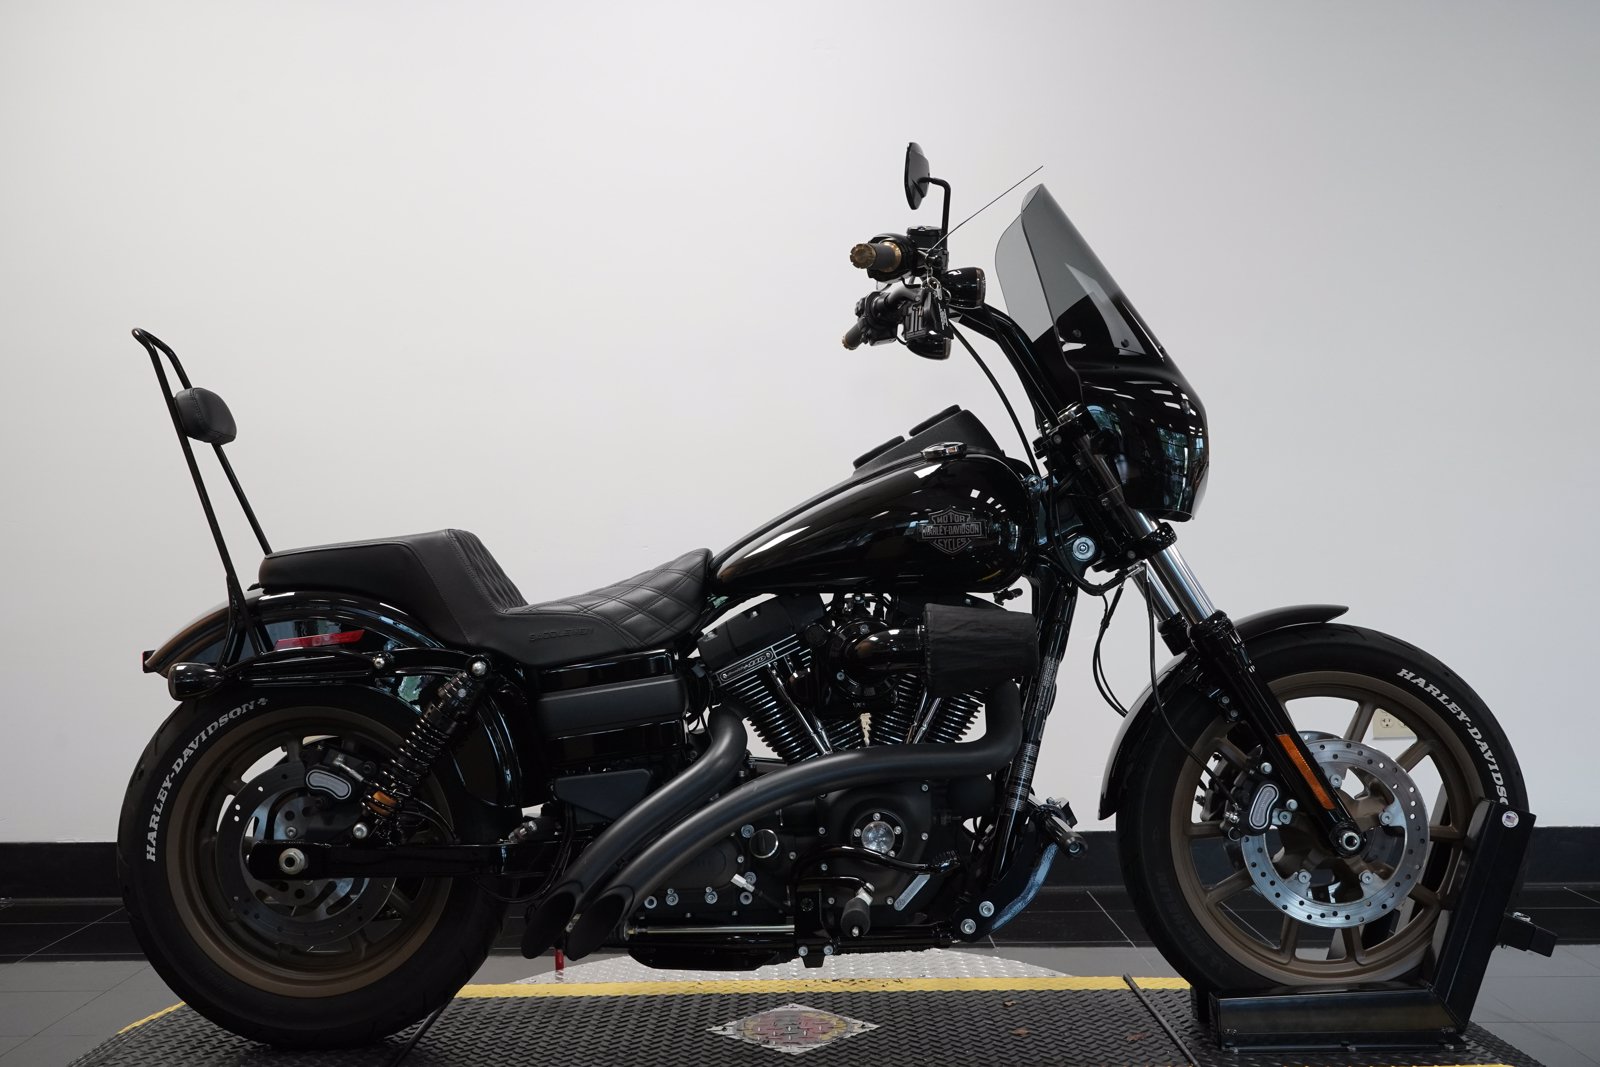 Pre-Owned 2017 Harley-Davidson Dyna Low Rider S FXDLS Dyna in Fort ...